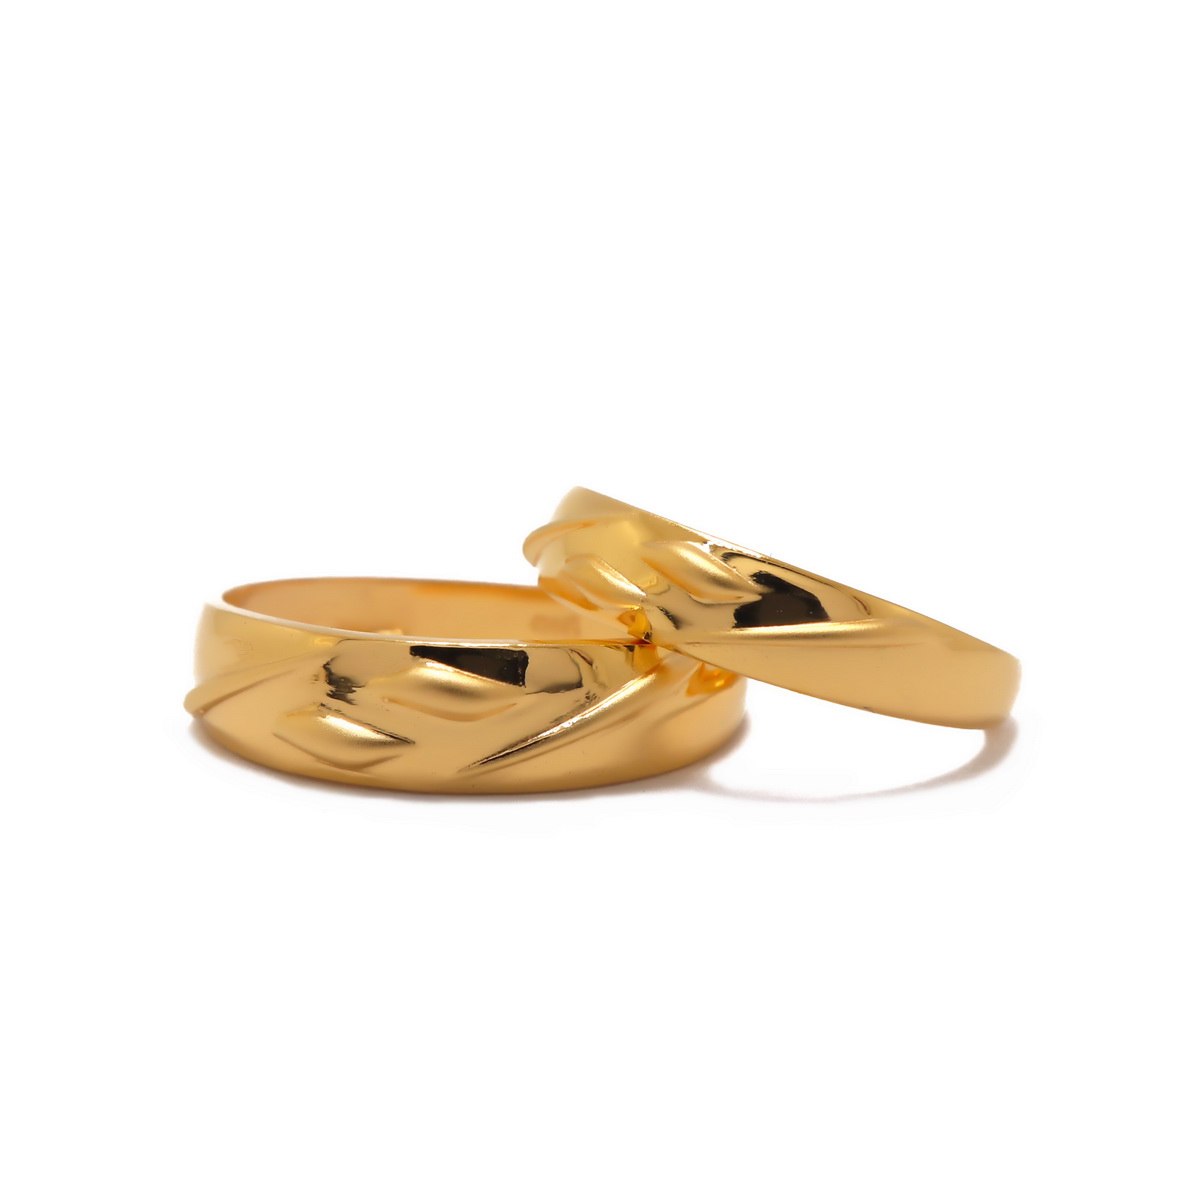 Buy quality 22k yellow gold plain couple rings in Noida